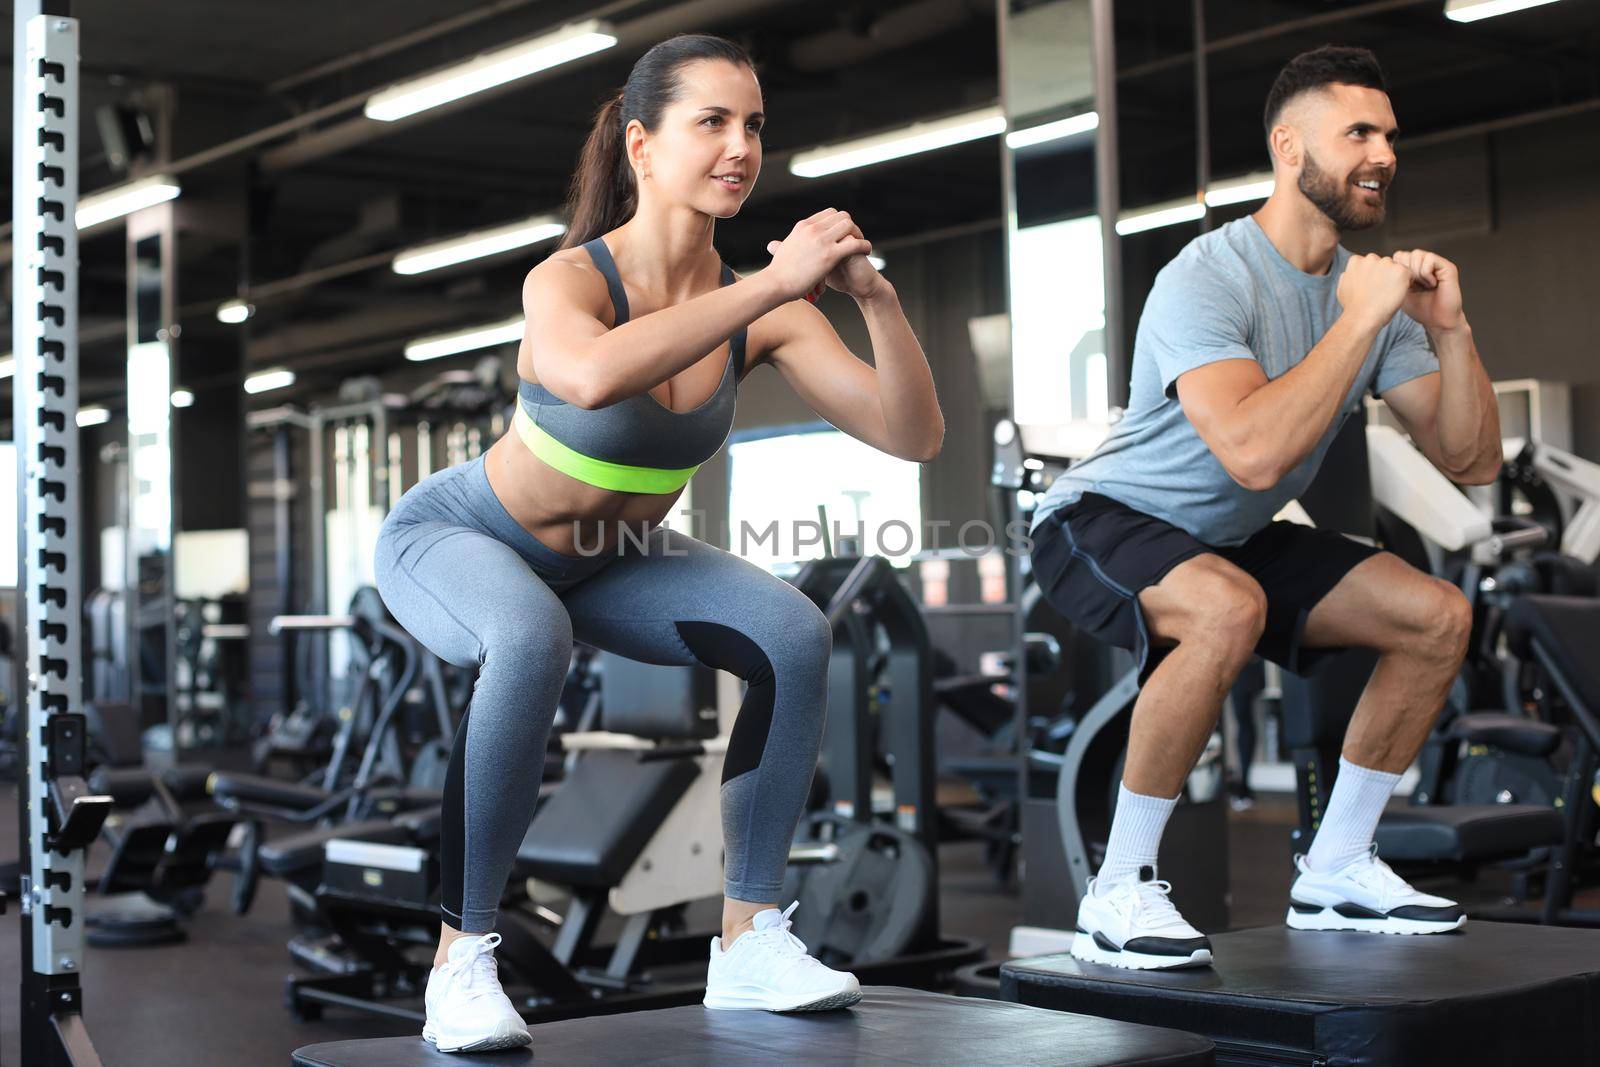 Fit couple doing jumping squats in crossfit gym